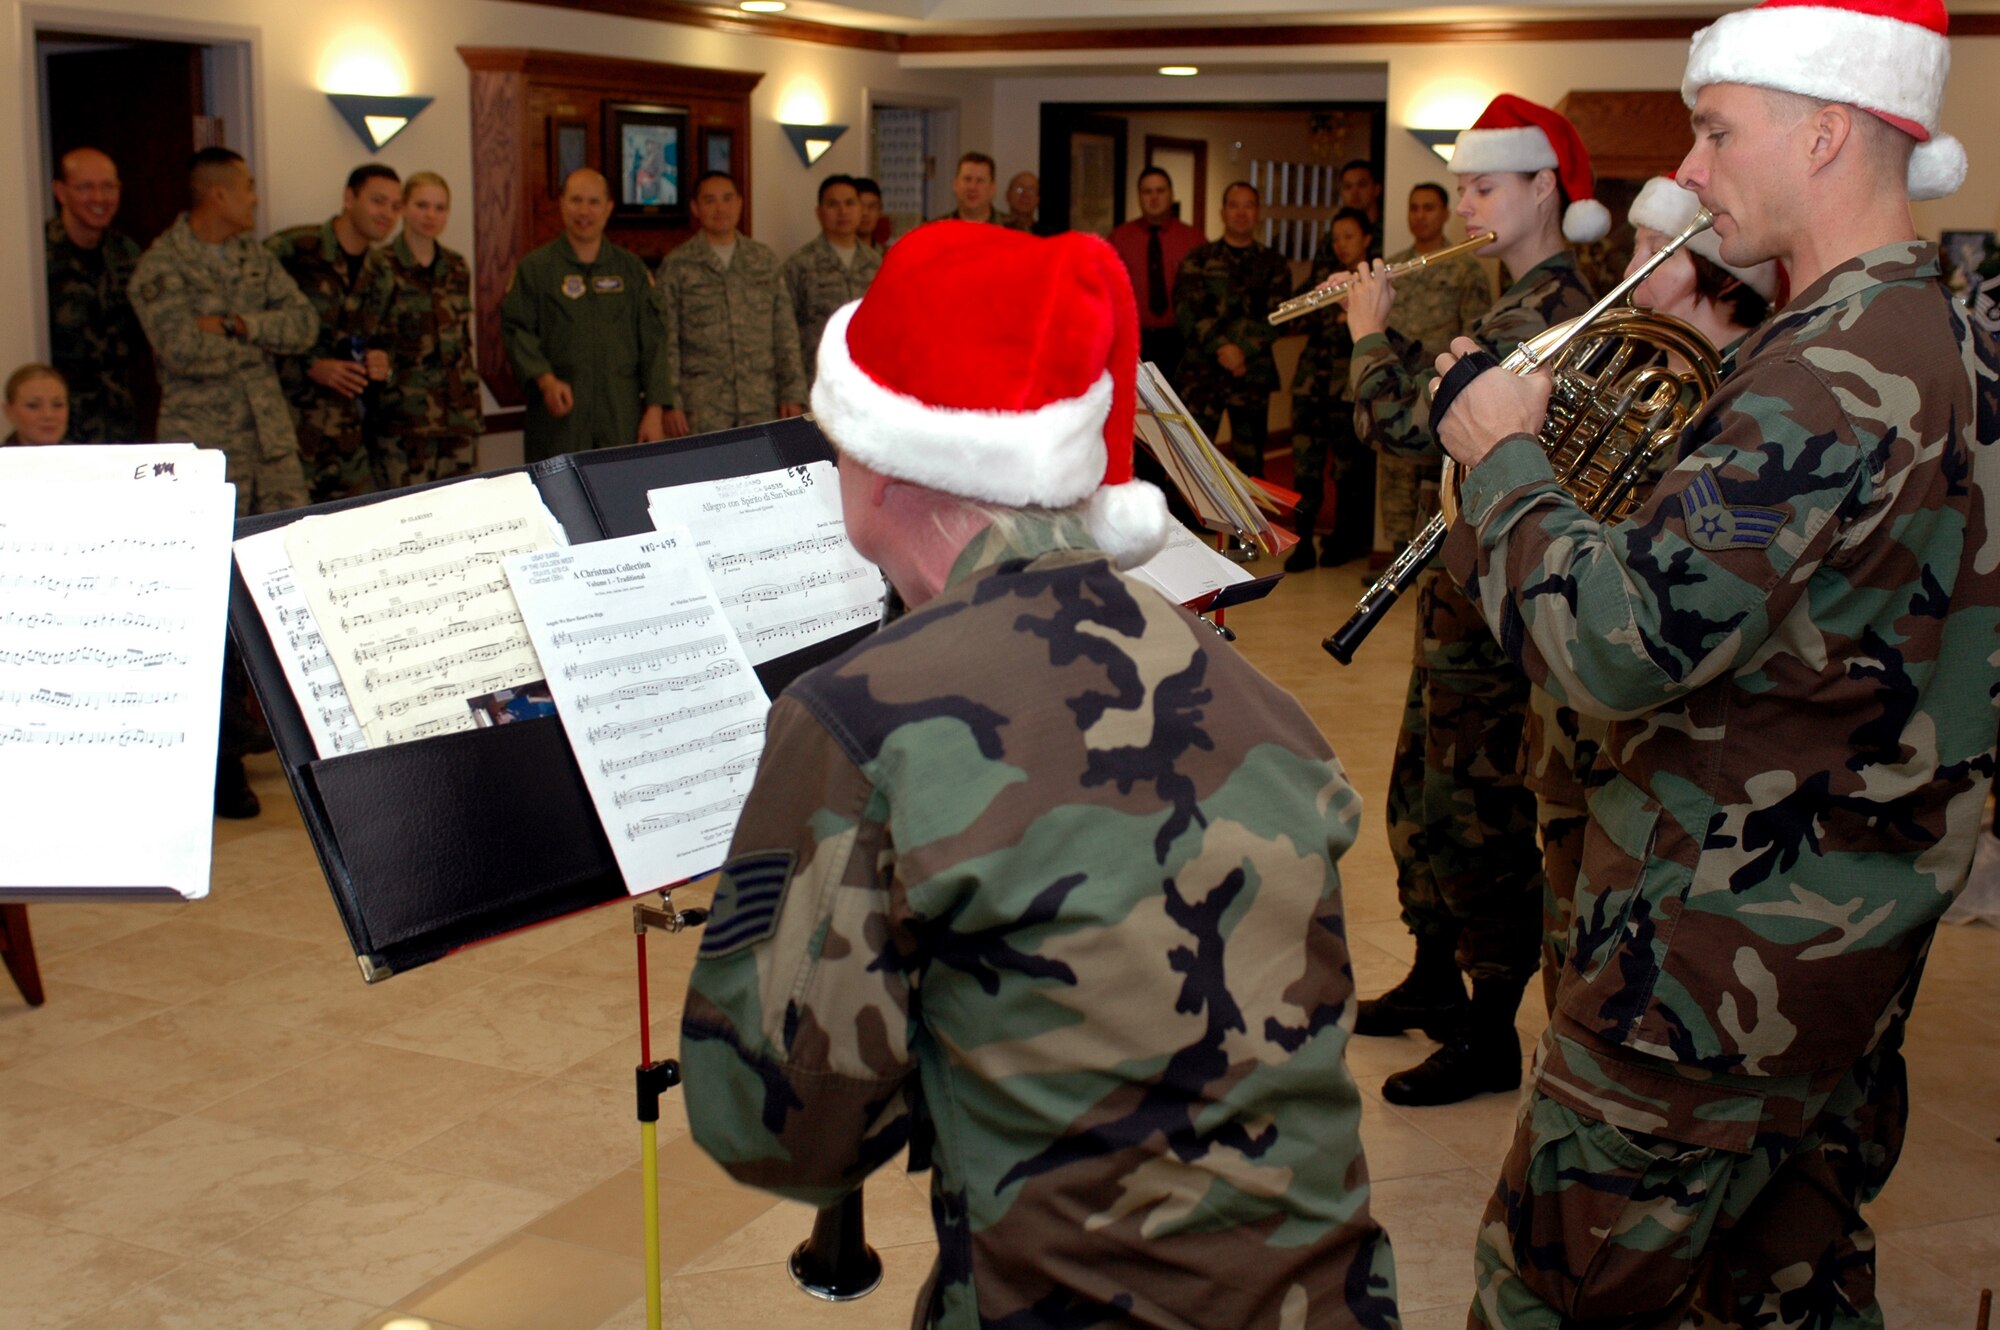 Members of the U.S. Air Force Band of the Golden West perform Christmas music to members of the 60th Air Mobility Wing in Bldg. 51 Dec. 5. The quintet traveled around the base providing entertainment to Team Travis. (U.S. Air Force photo/Senior Airman Shaun Emery)